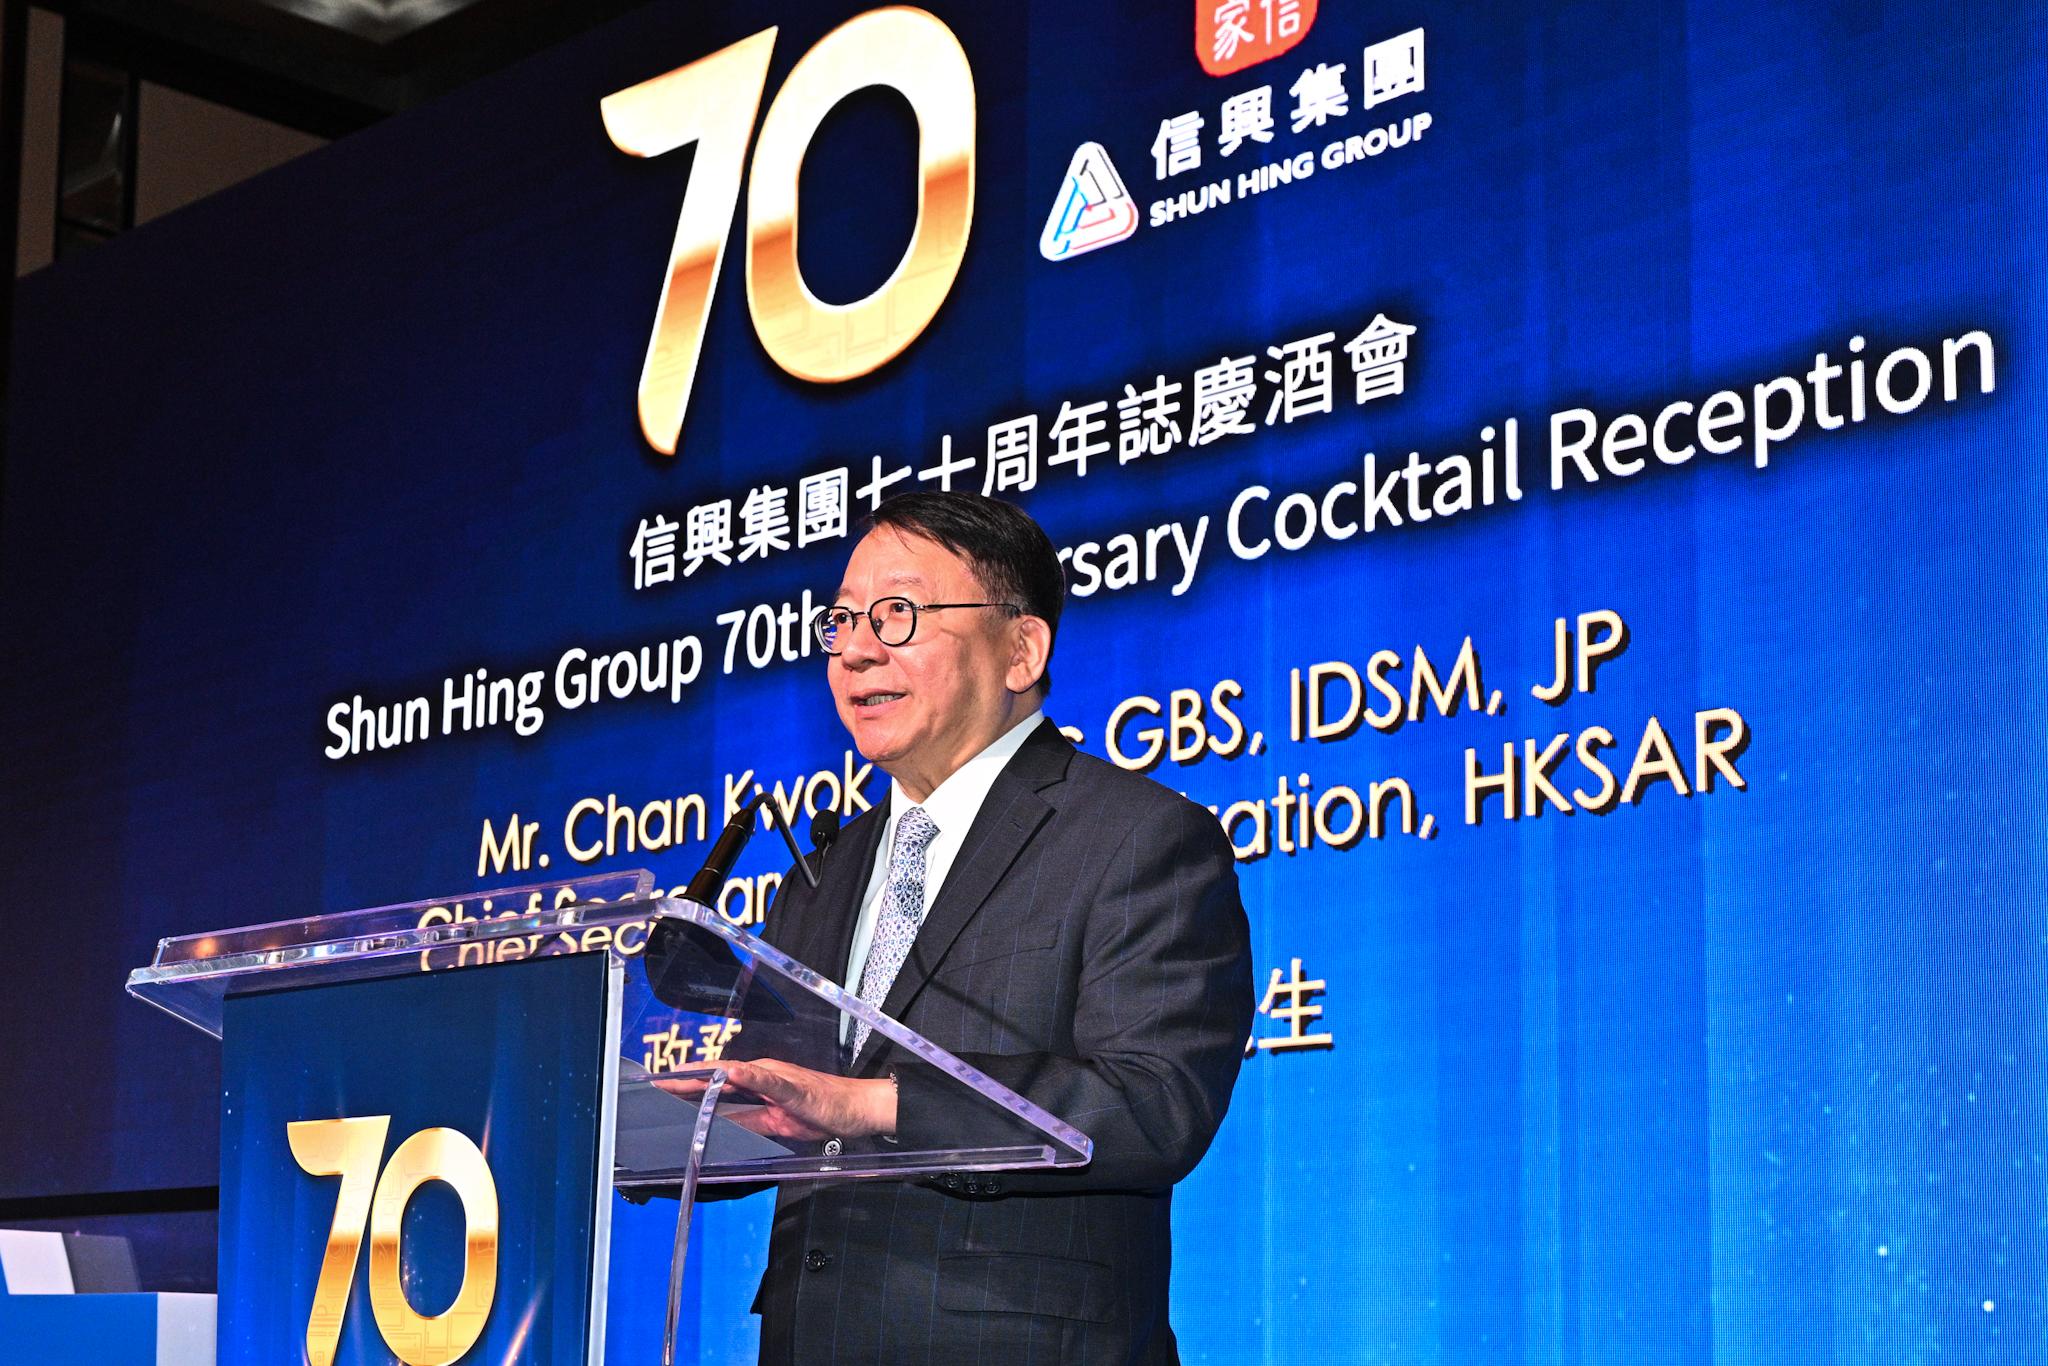 The Chief Secretary for Administration, Mr Chan Kwok-ki, speaks at the Shun Hing Group 70th Anniversary Cocktail Reception today (November 10).